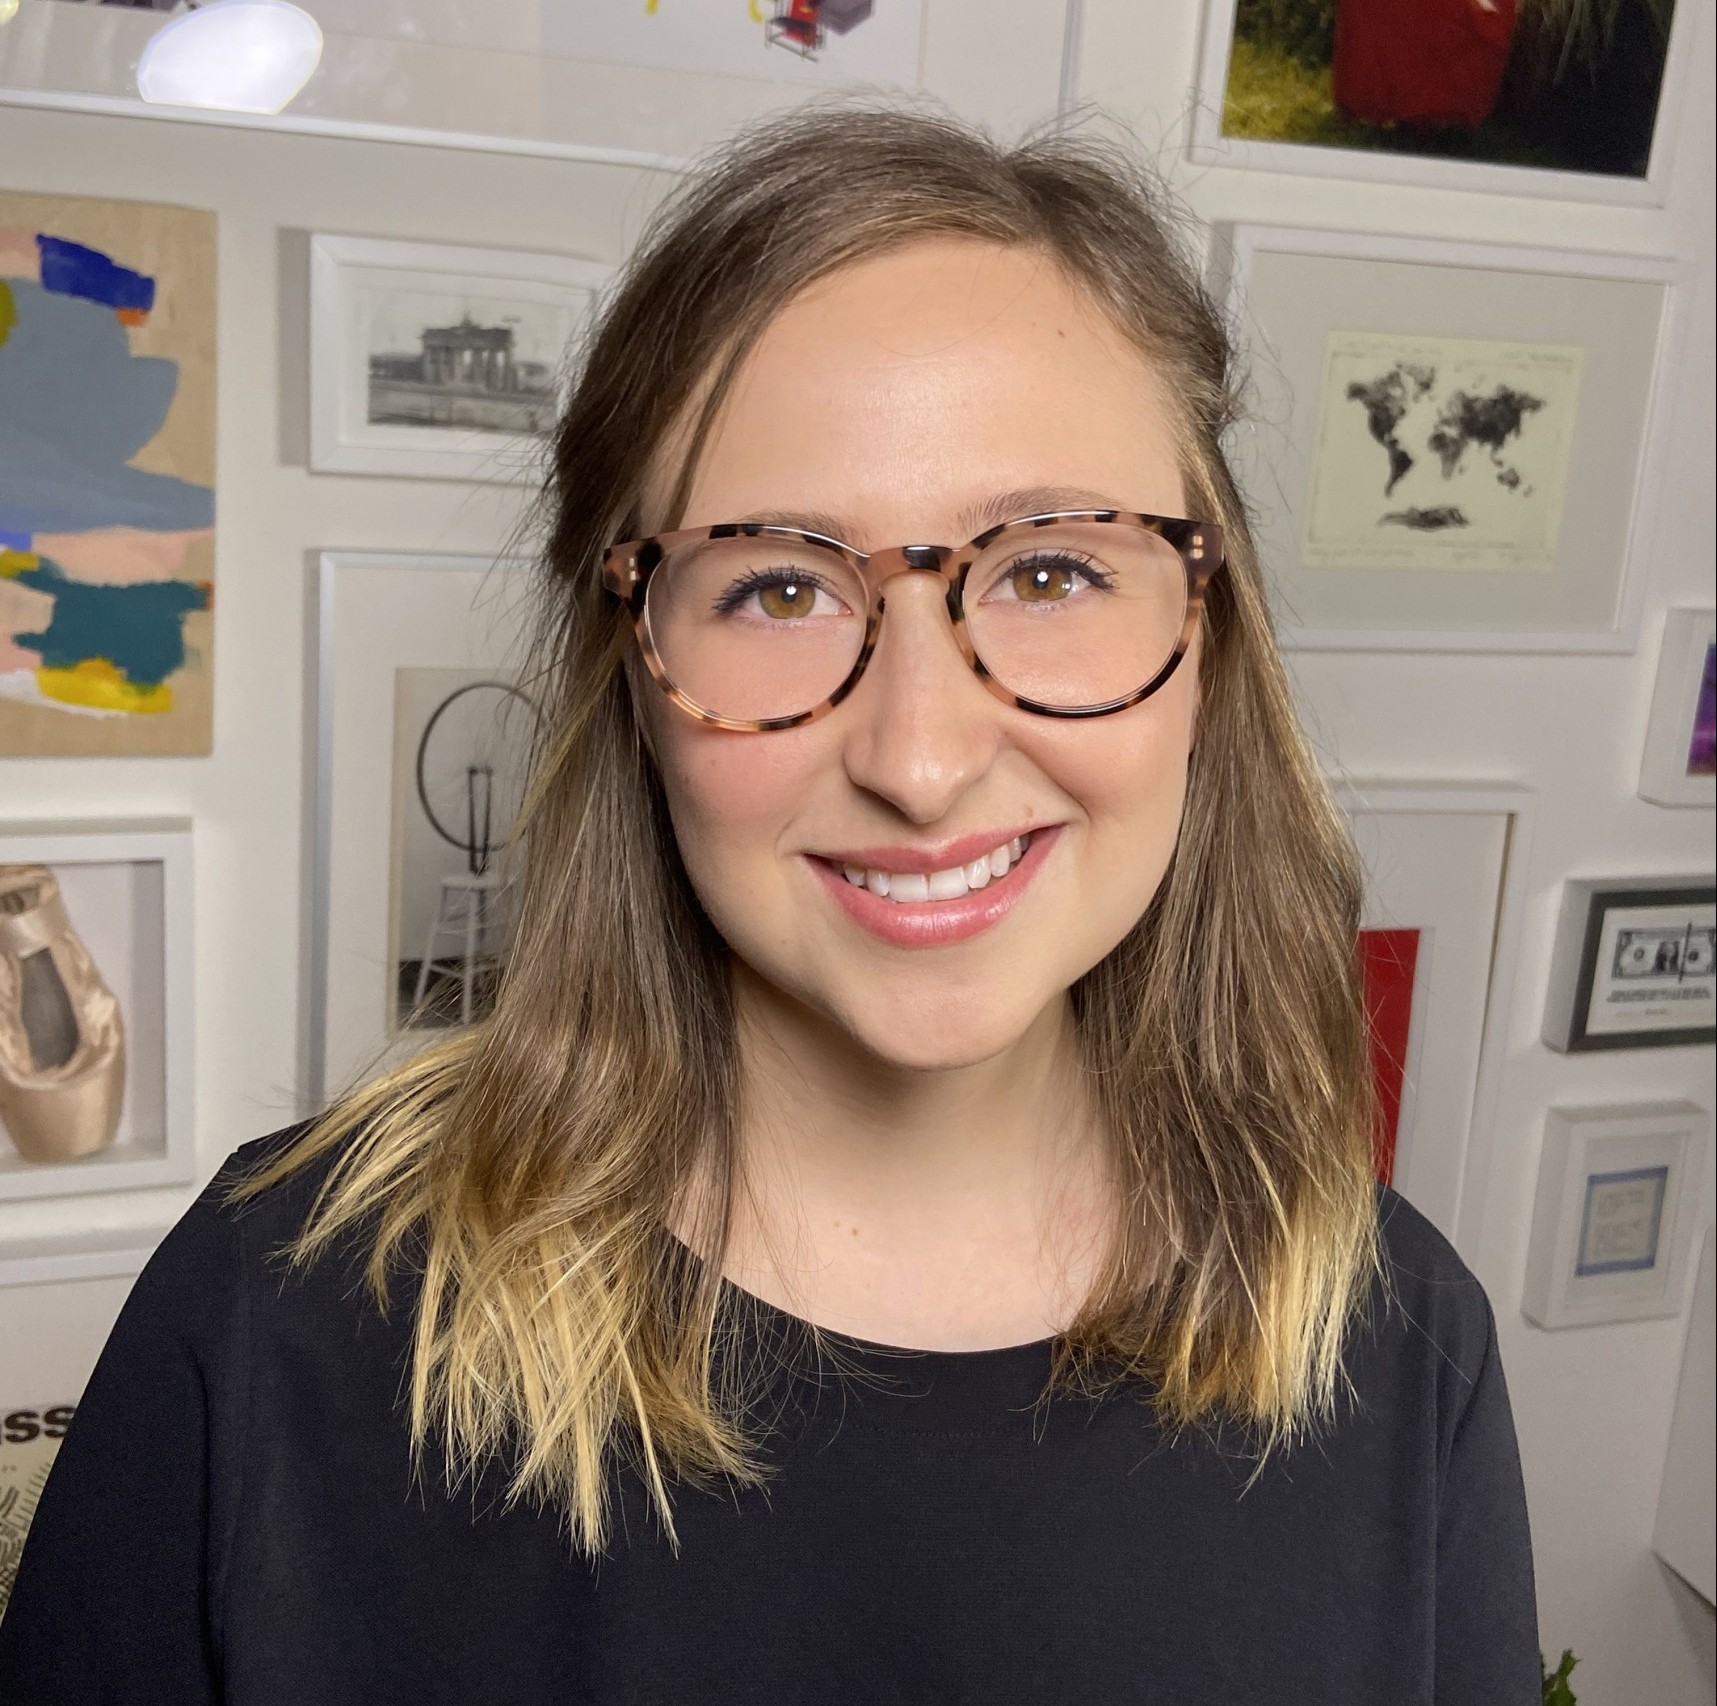 Ana is smiling at the camera in front of a wall with lots of picture frames. She has blond hair and is wearing glasses and a a black shirt. 